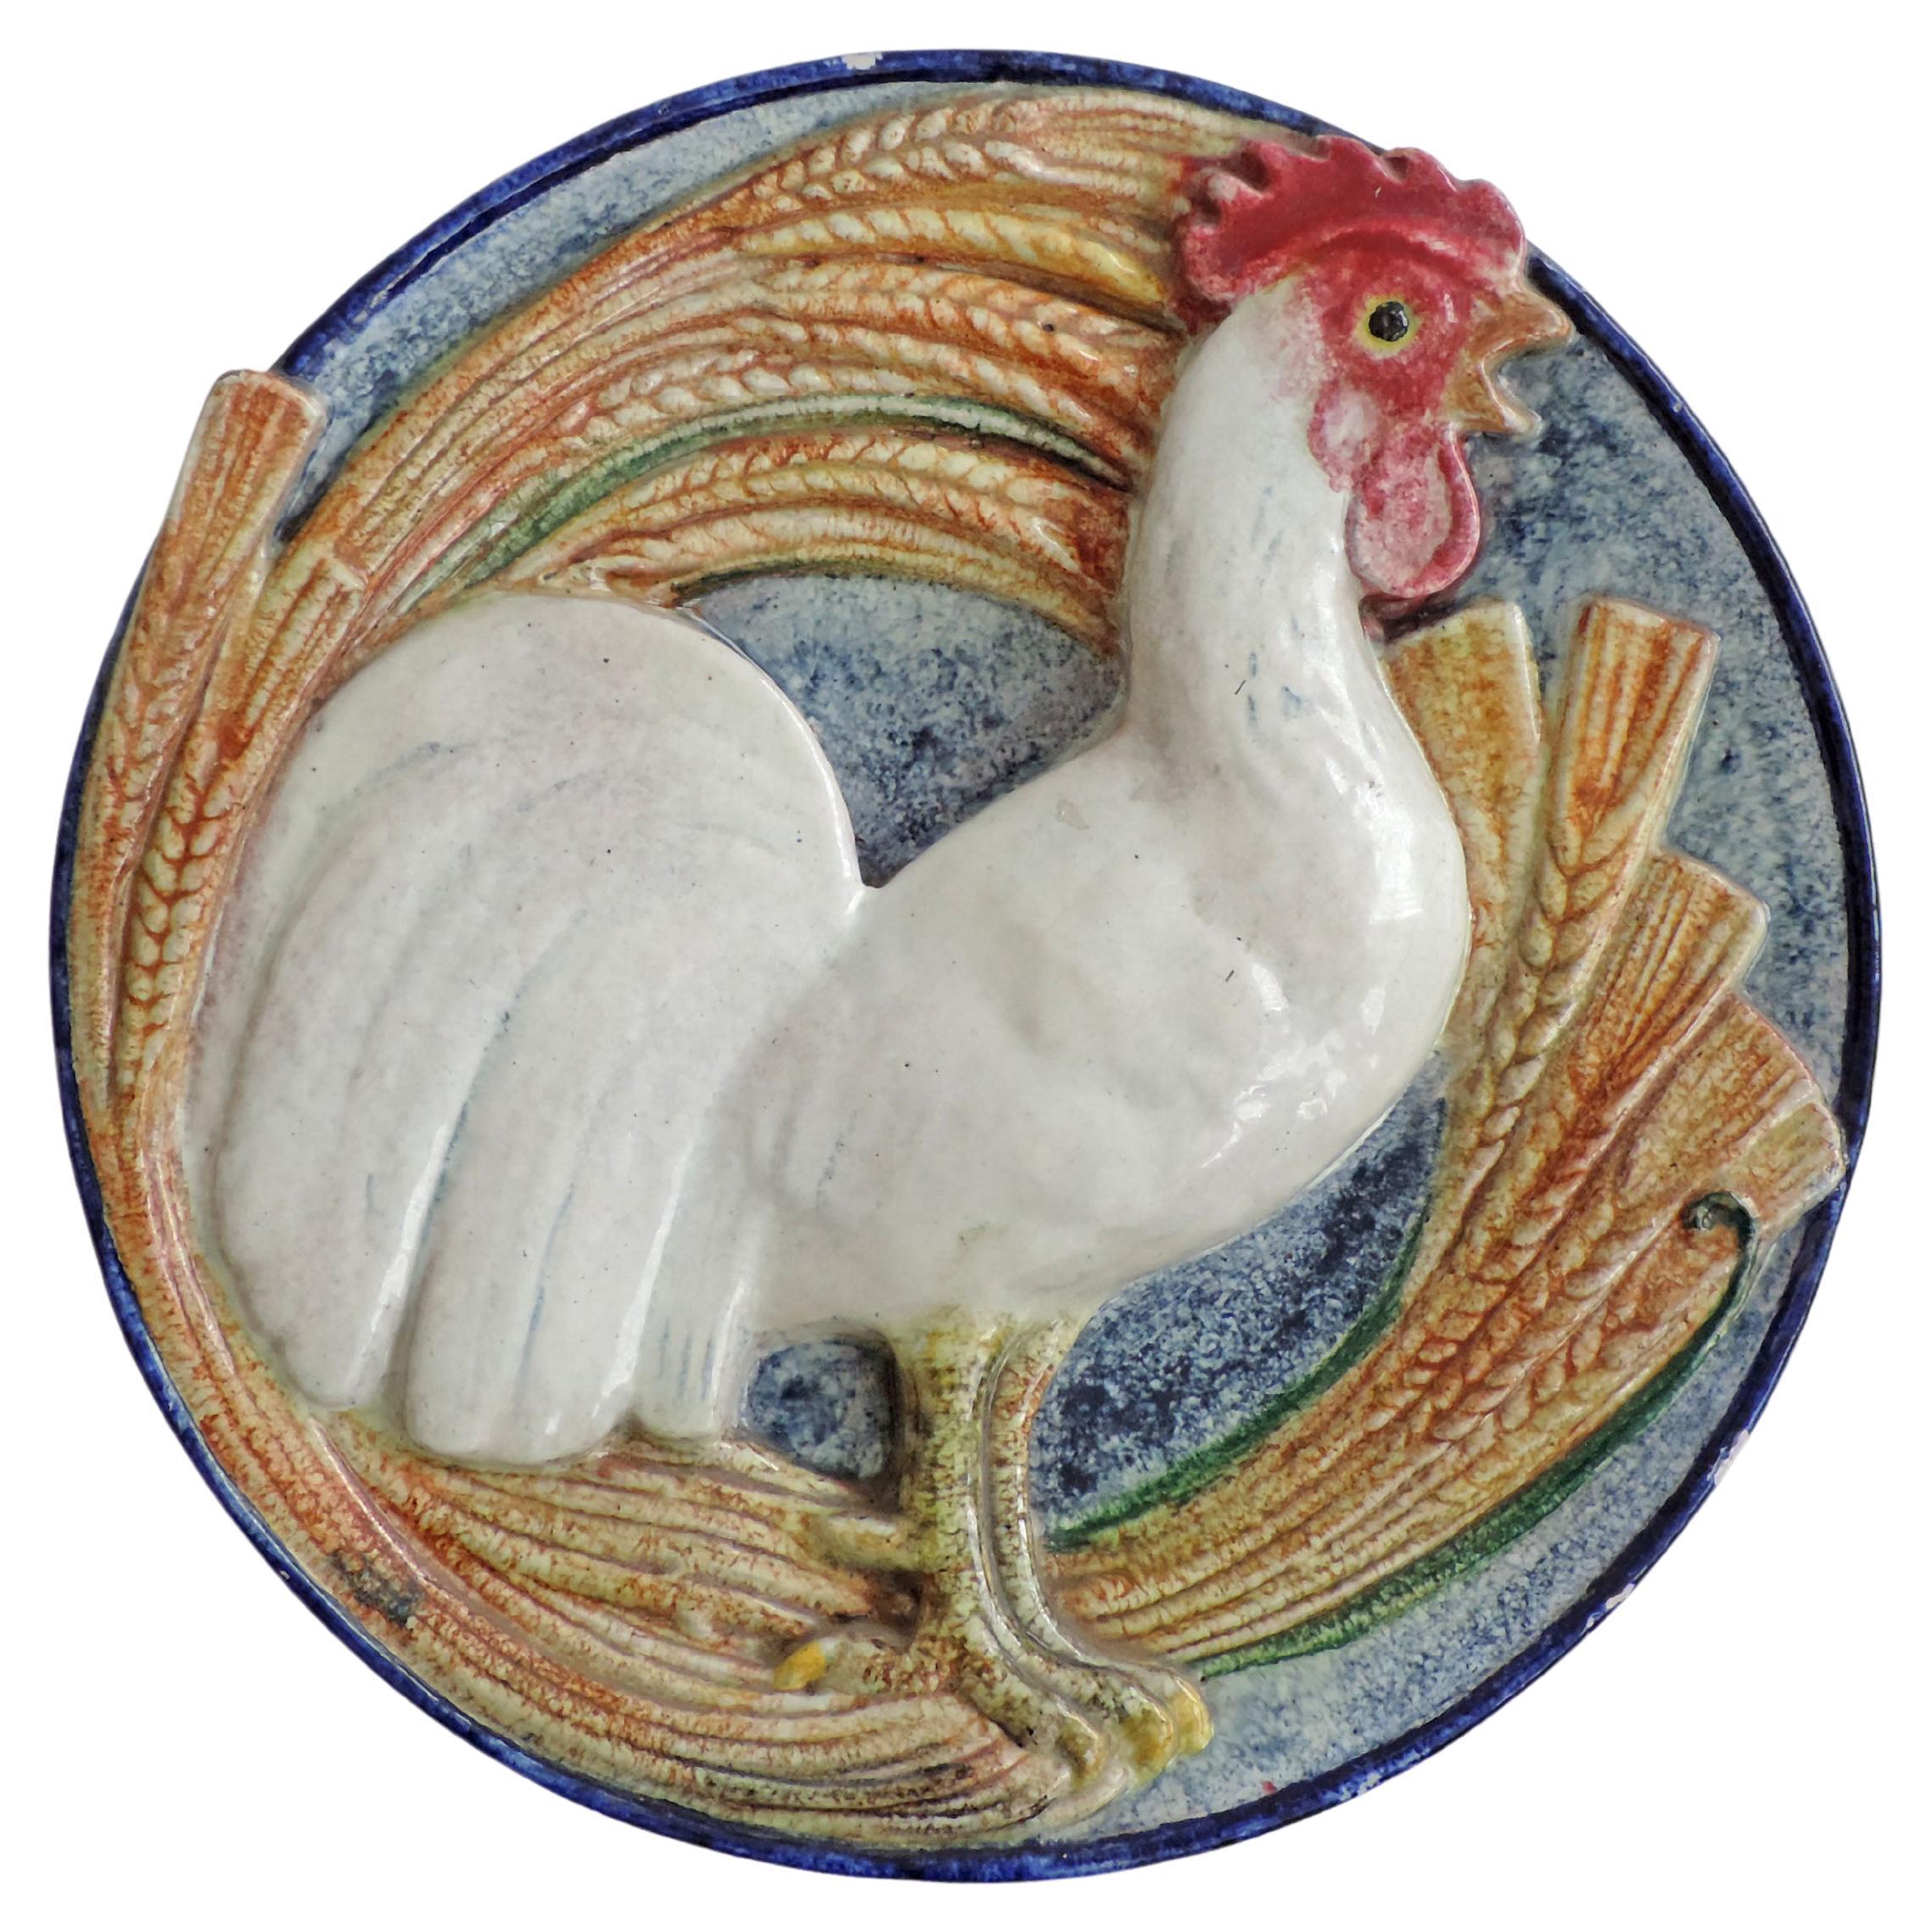 Monumental Ceramic Wall Plate with a Chicken